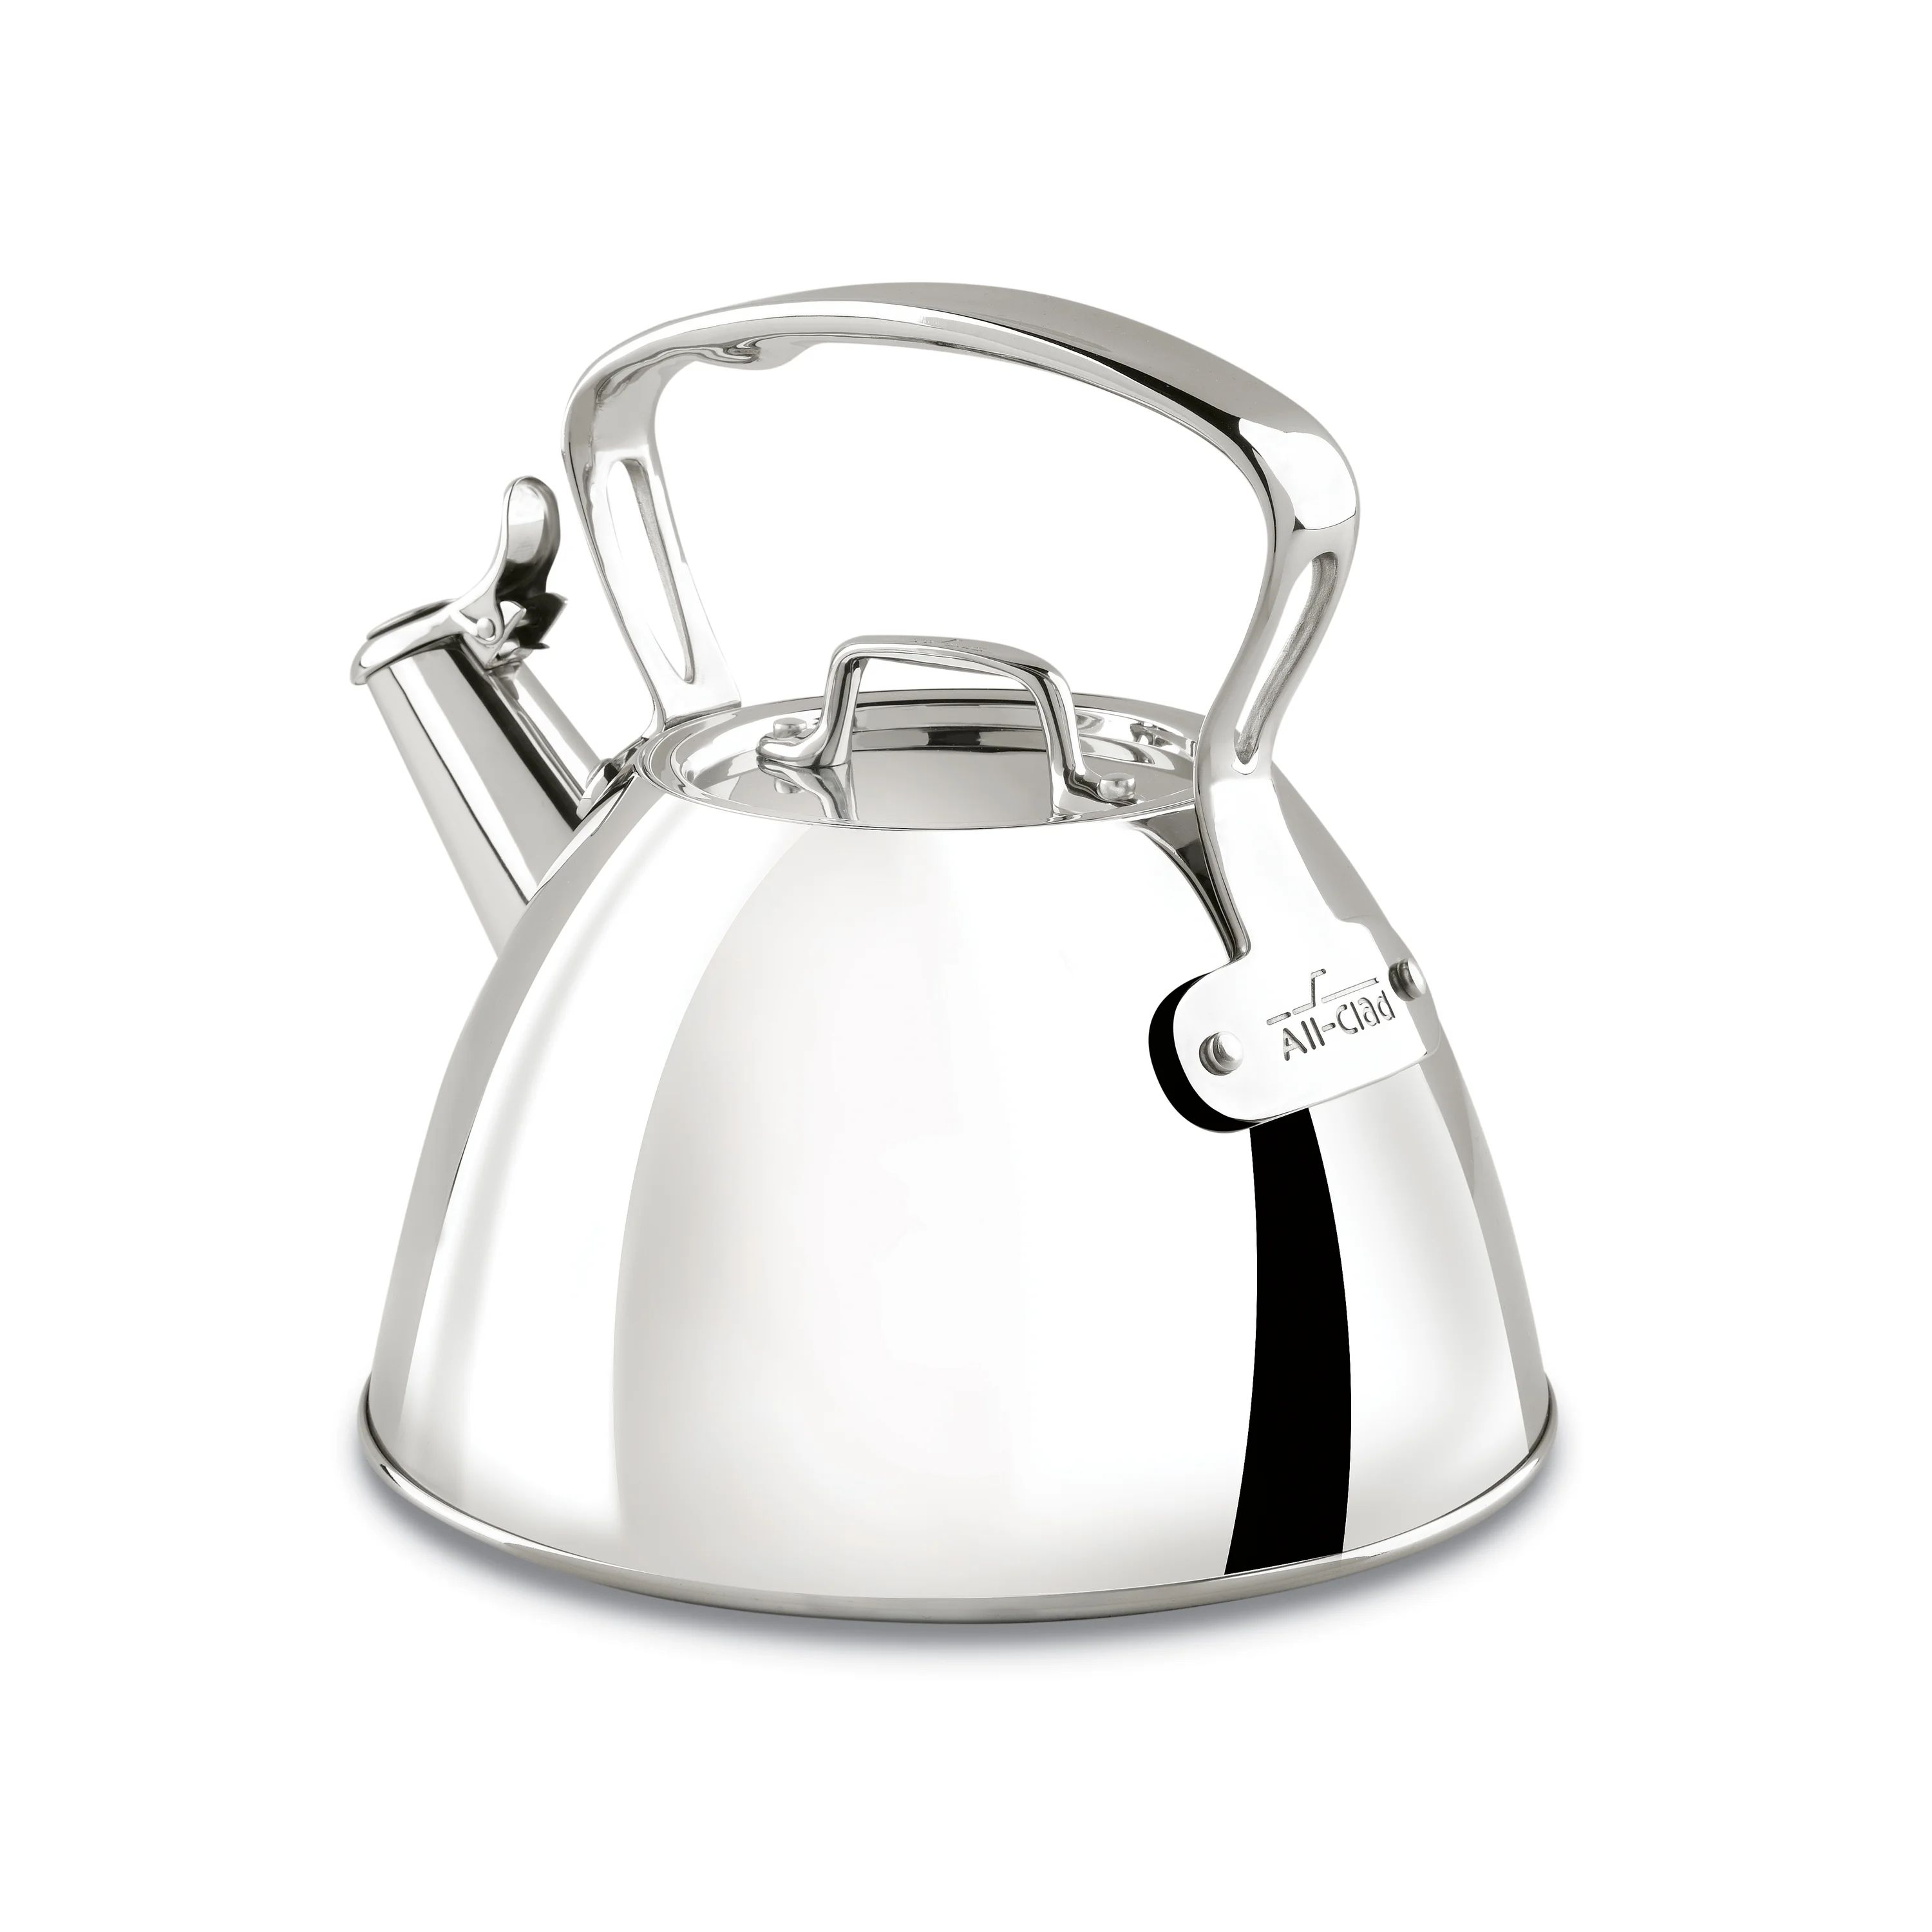 All-Clad Gourmet Accessories, Stainless Steel Stovetop Tea Kettle, 2 quart | Walmart (US)